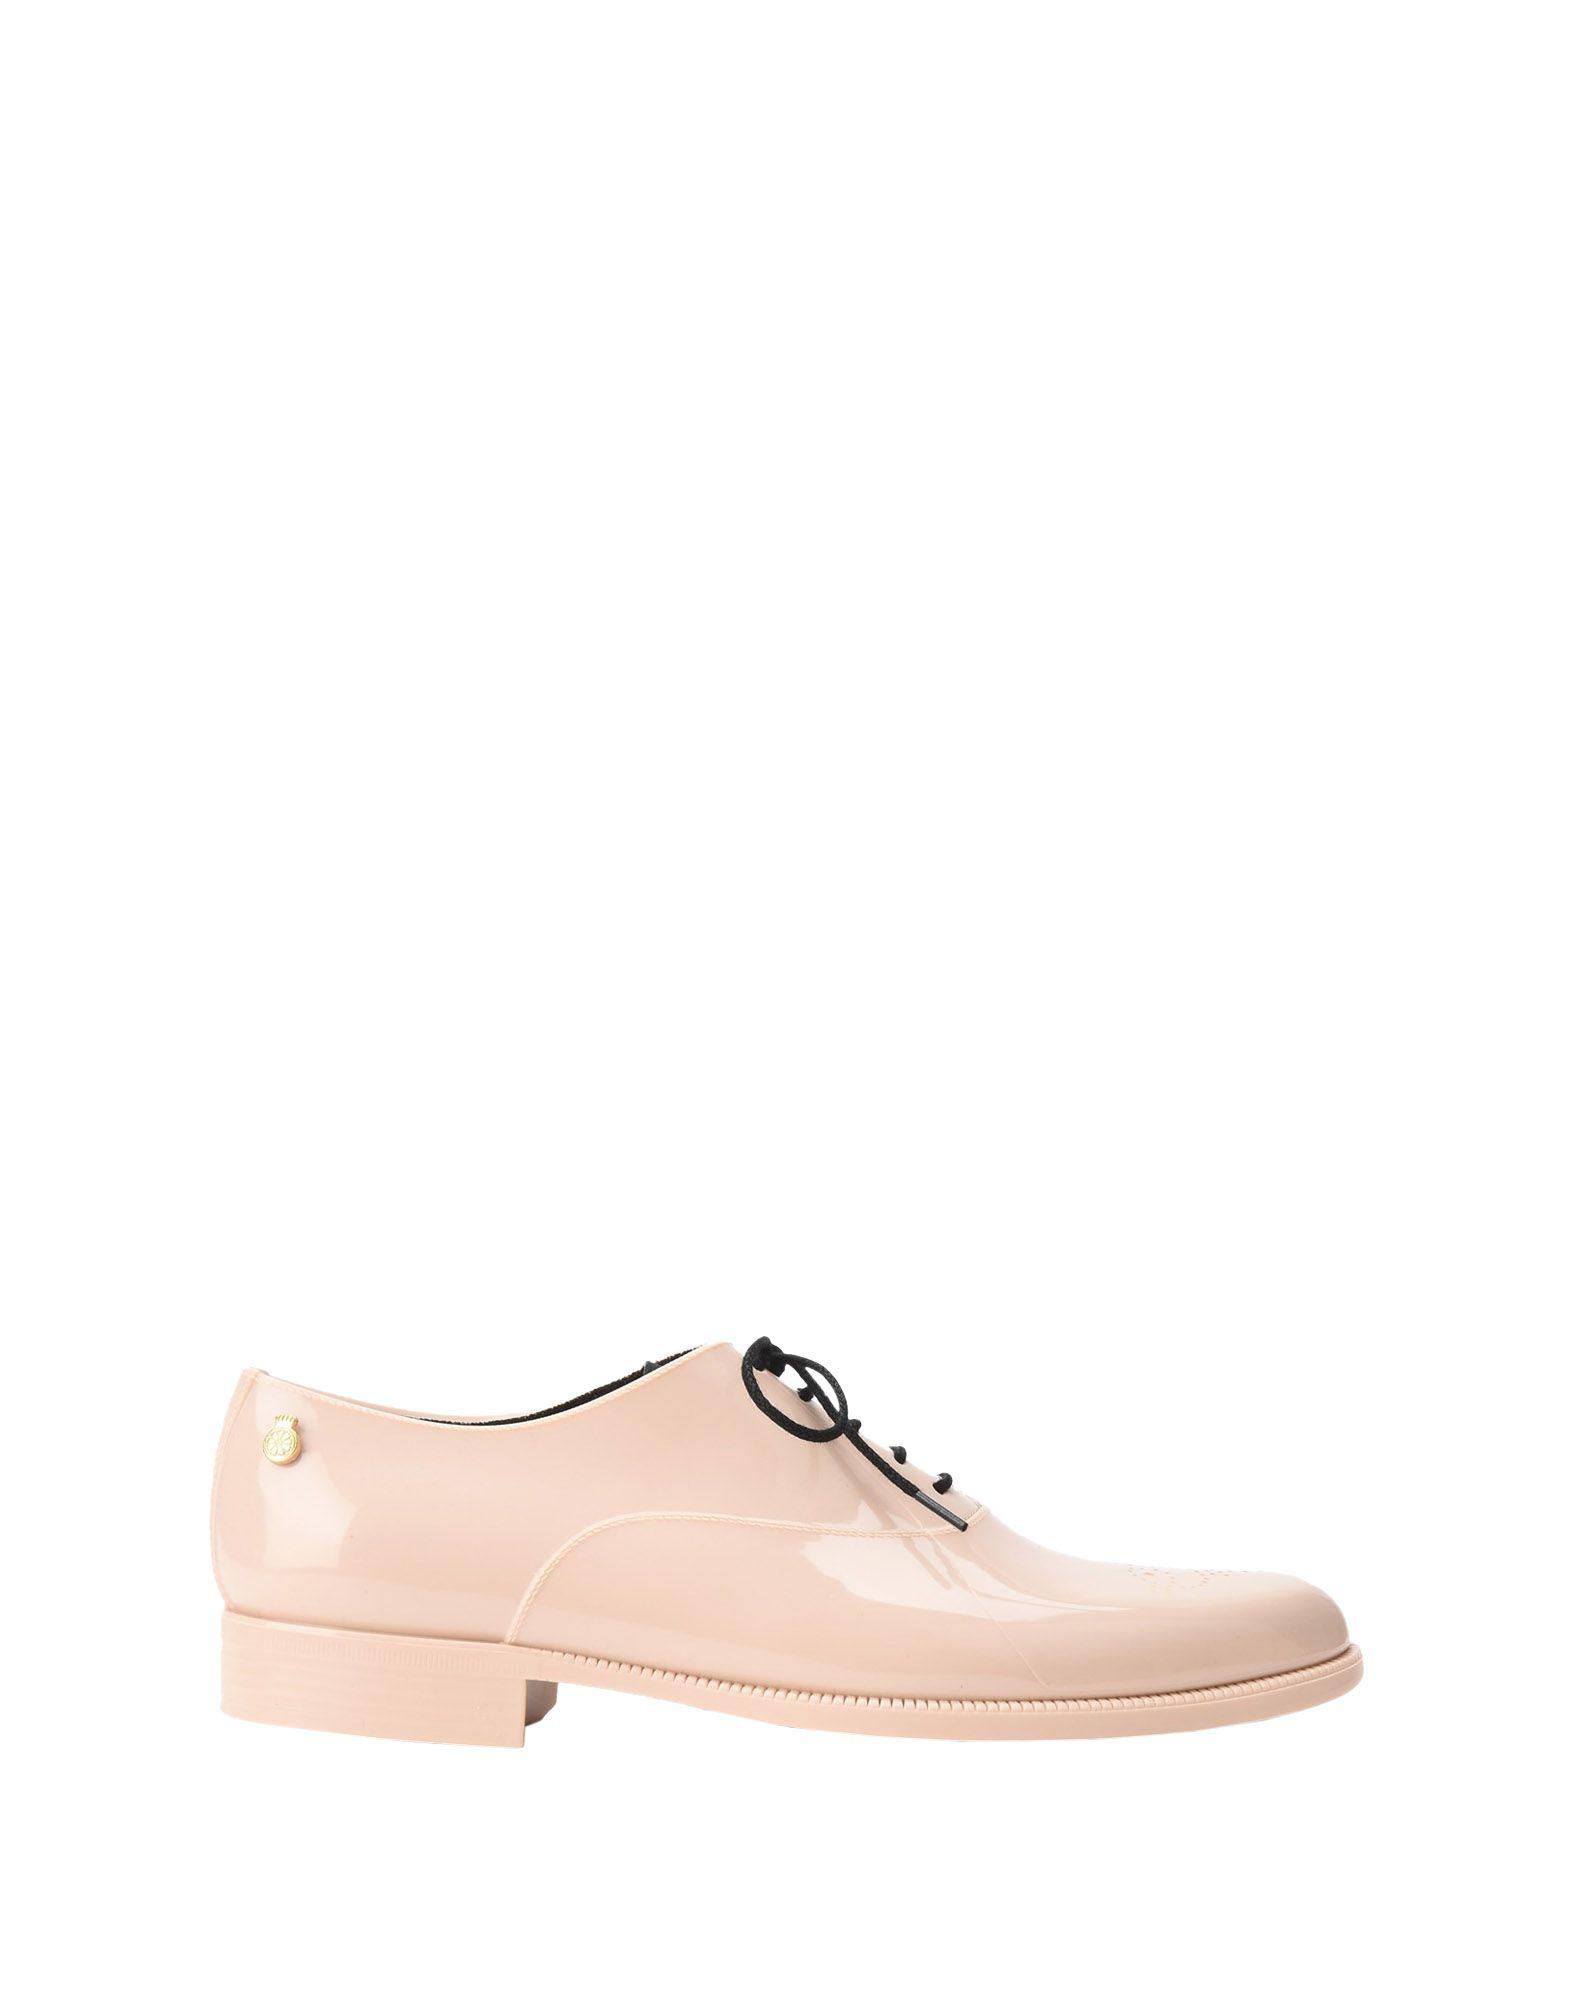 Lemon Jelly Rubber Laceup Shoe in Natural Lyst